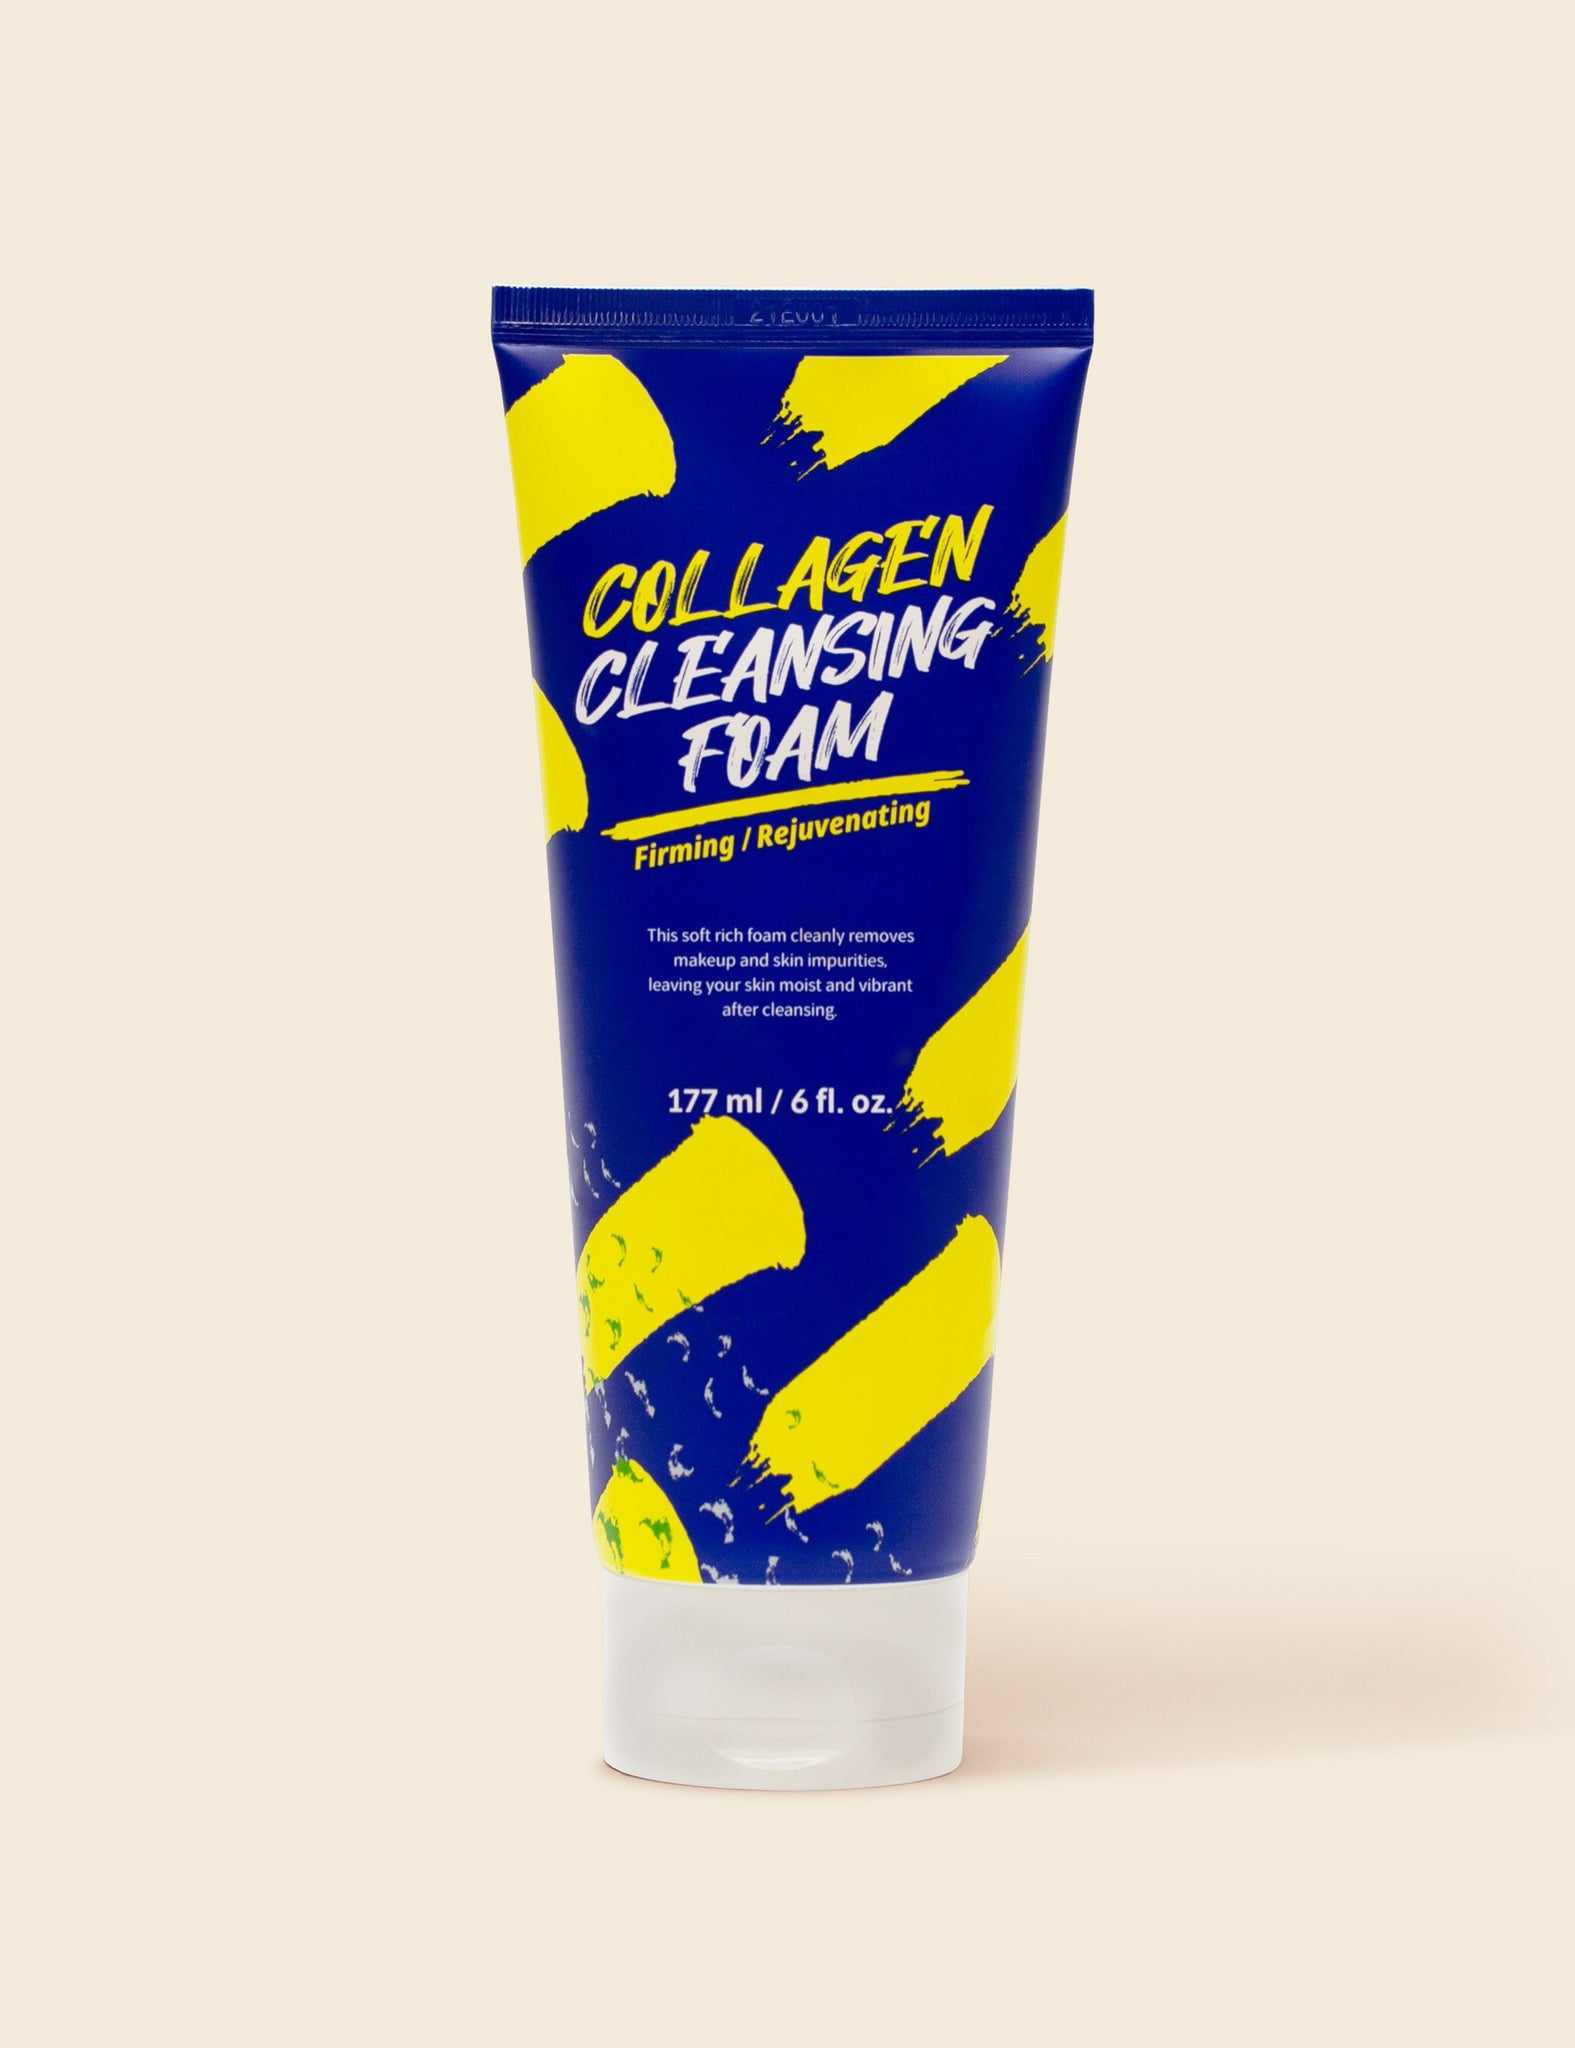 Collagen Cleansing Foam- firming/rejuvinating your skin